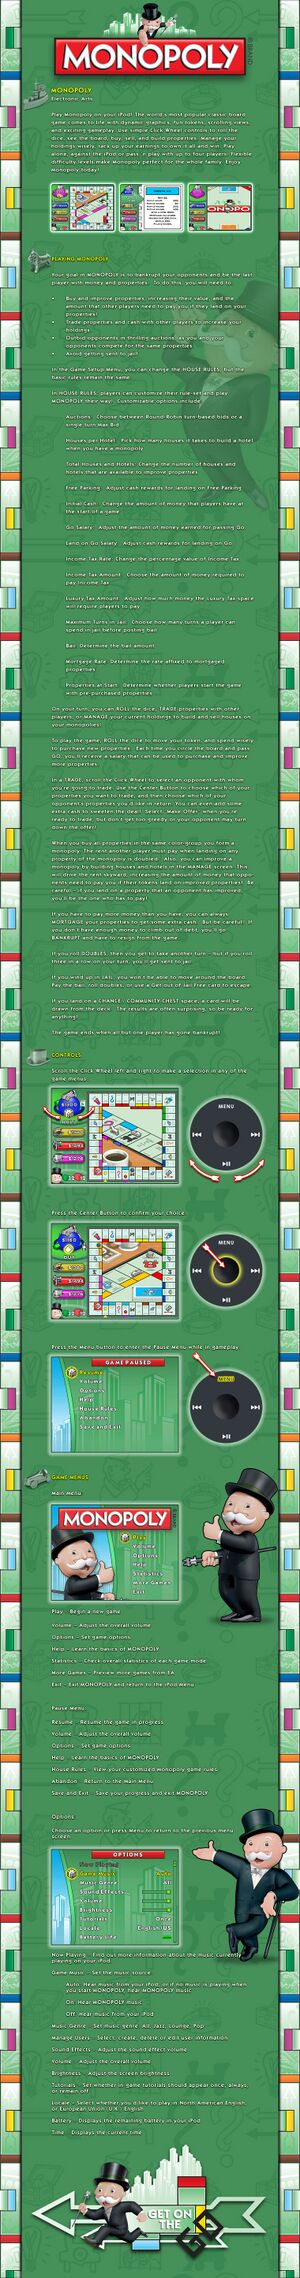 Monopoly Clickwheel Game Instruction Page.jpg